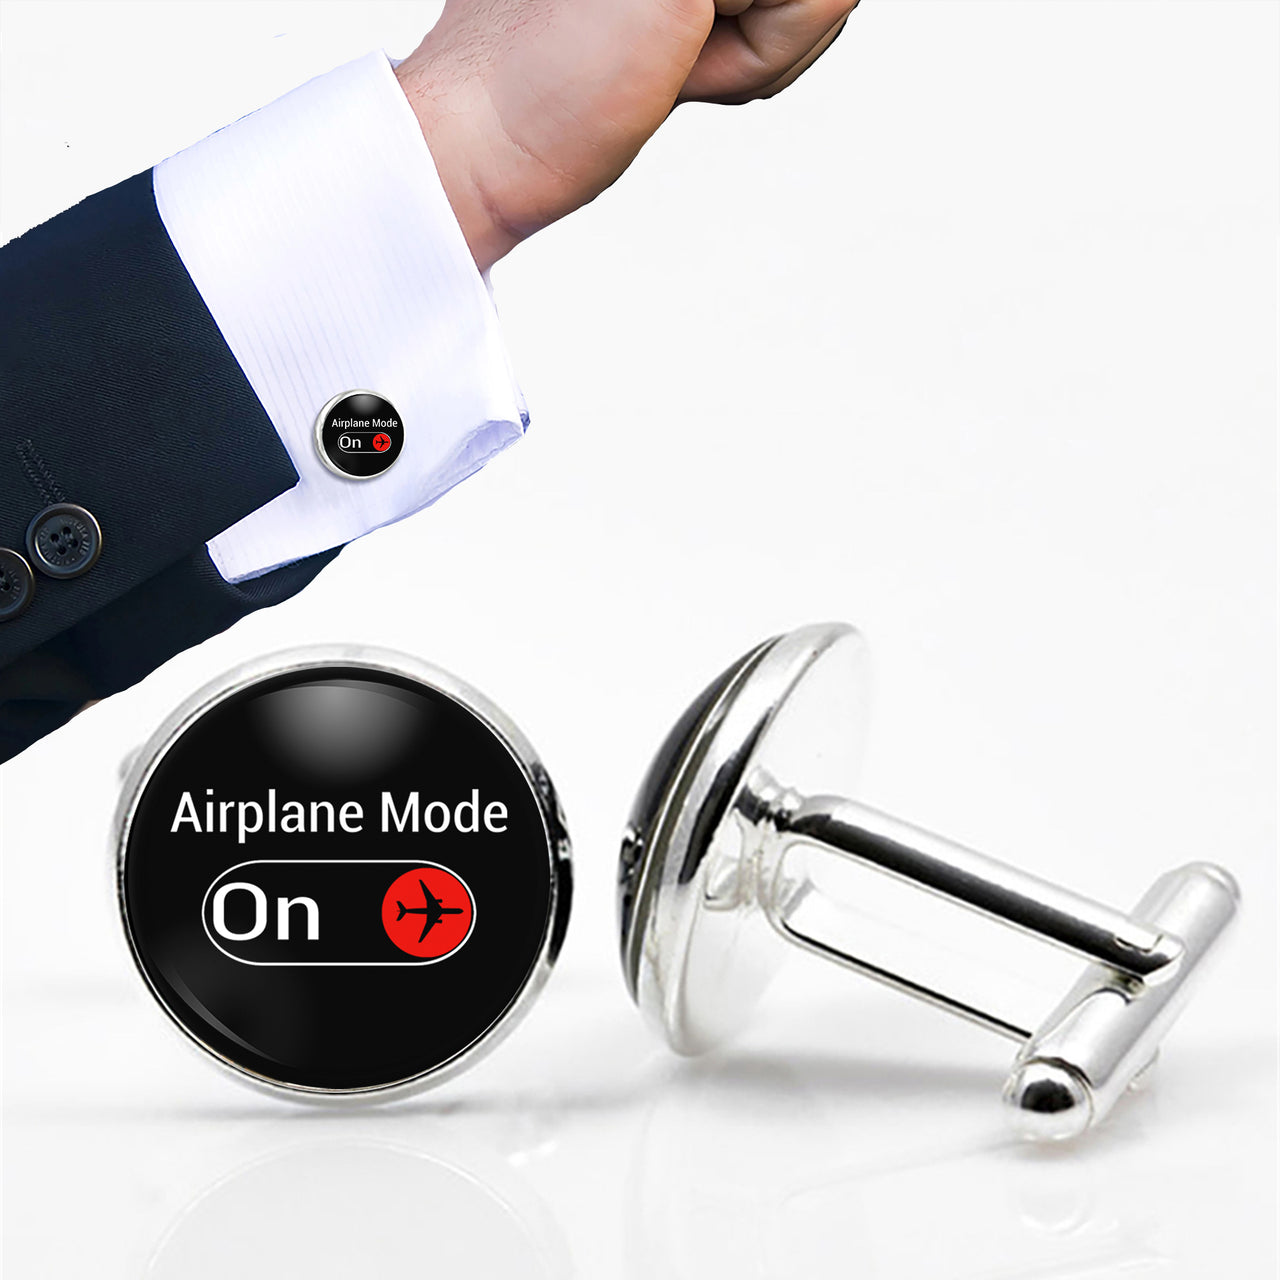 Airplane Mode On Designed Cuff Links